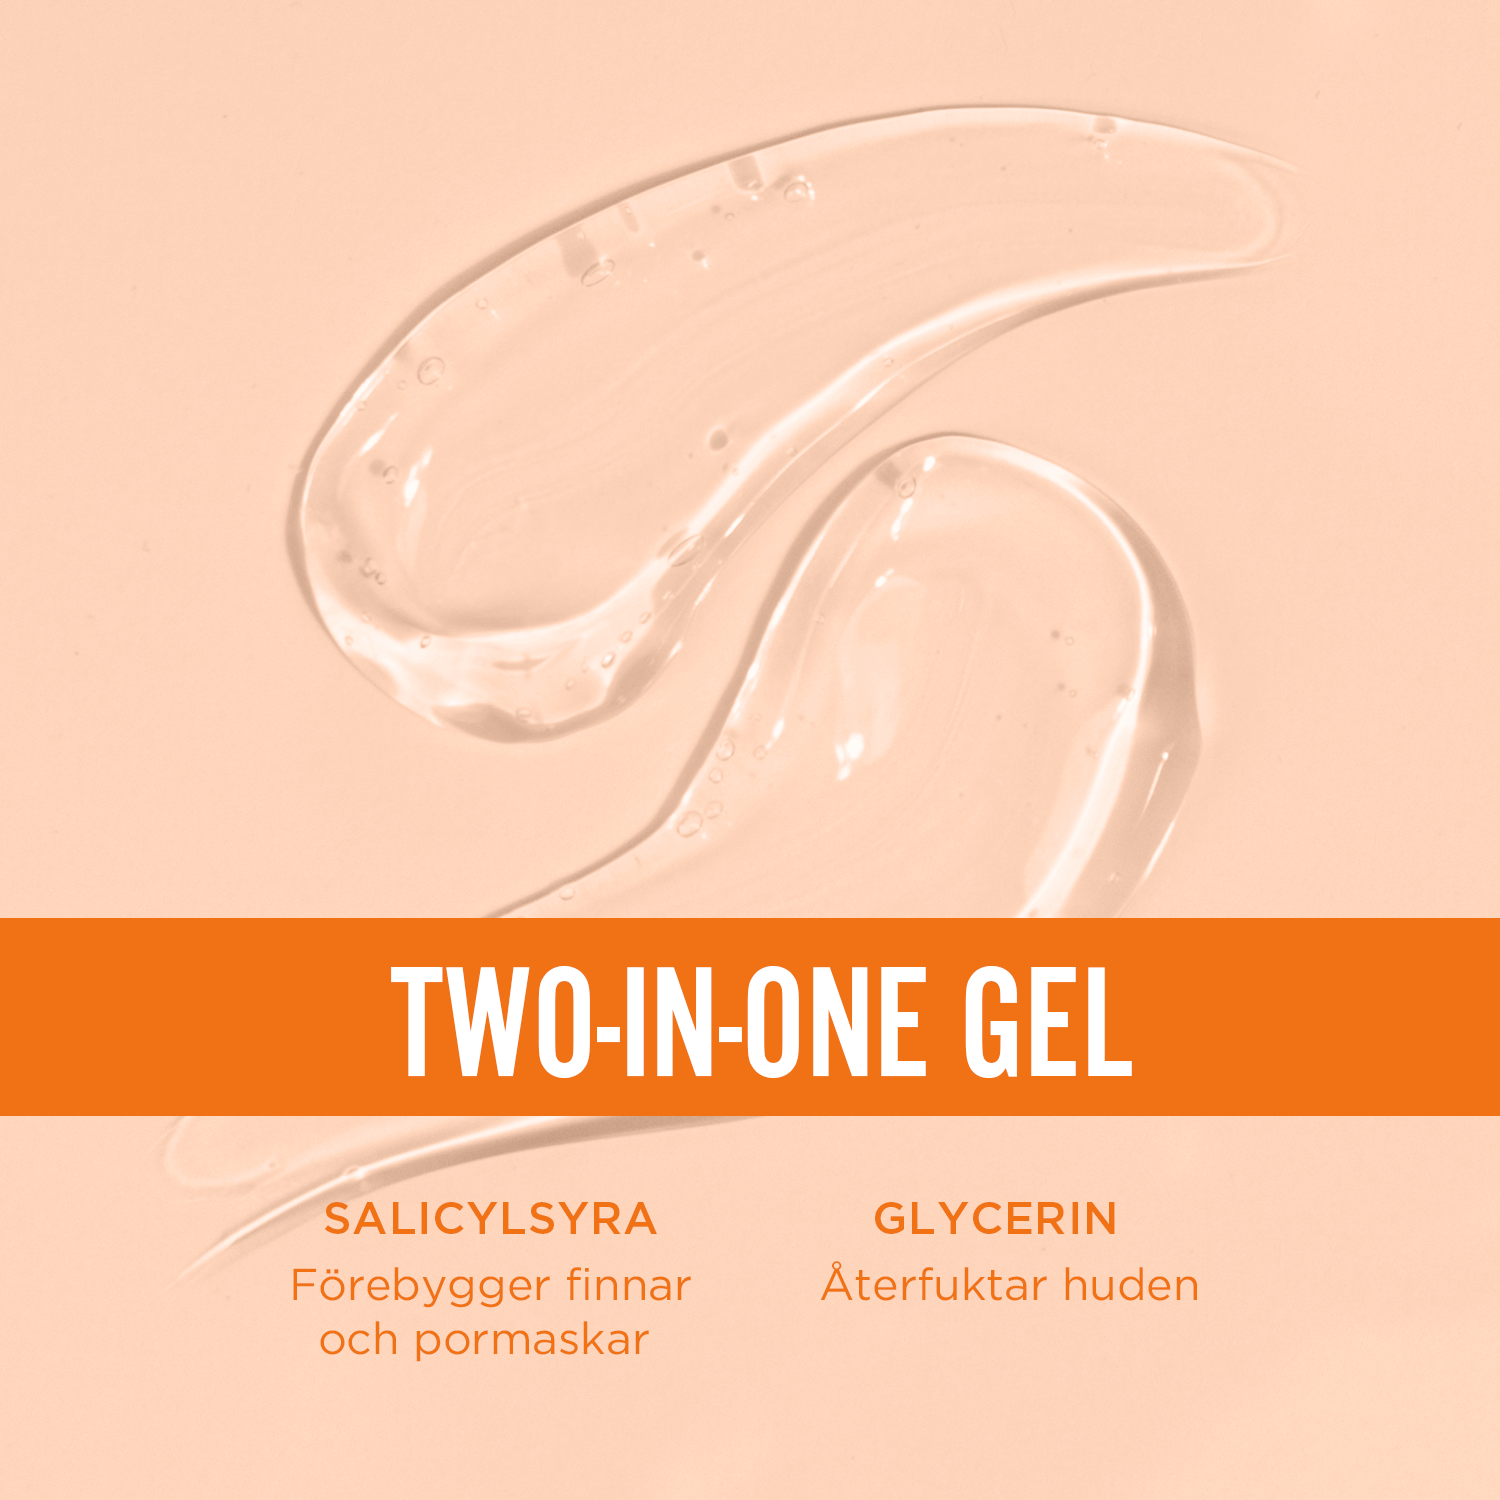 ACO Spotless Two-in-one Gel Oparfymerad 50 ml